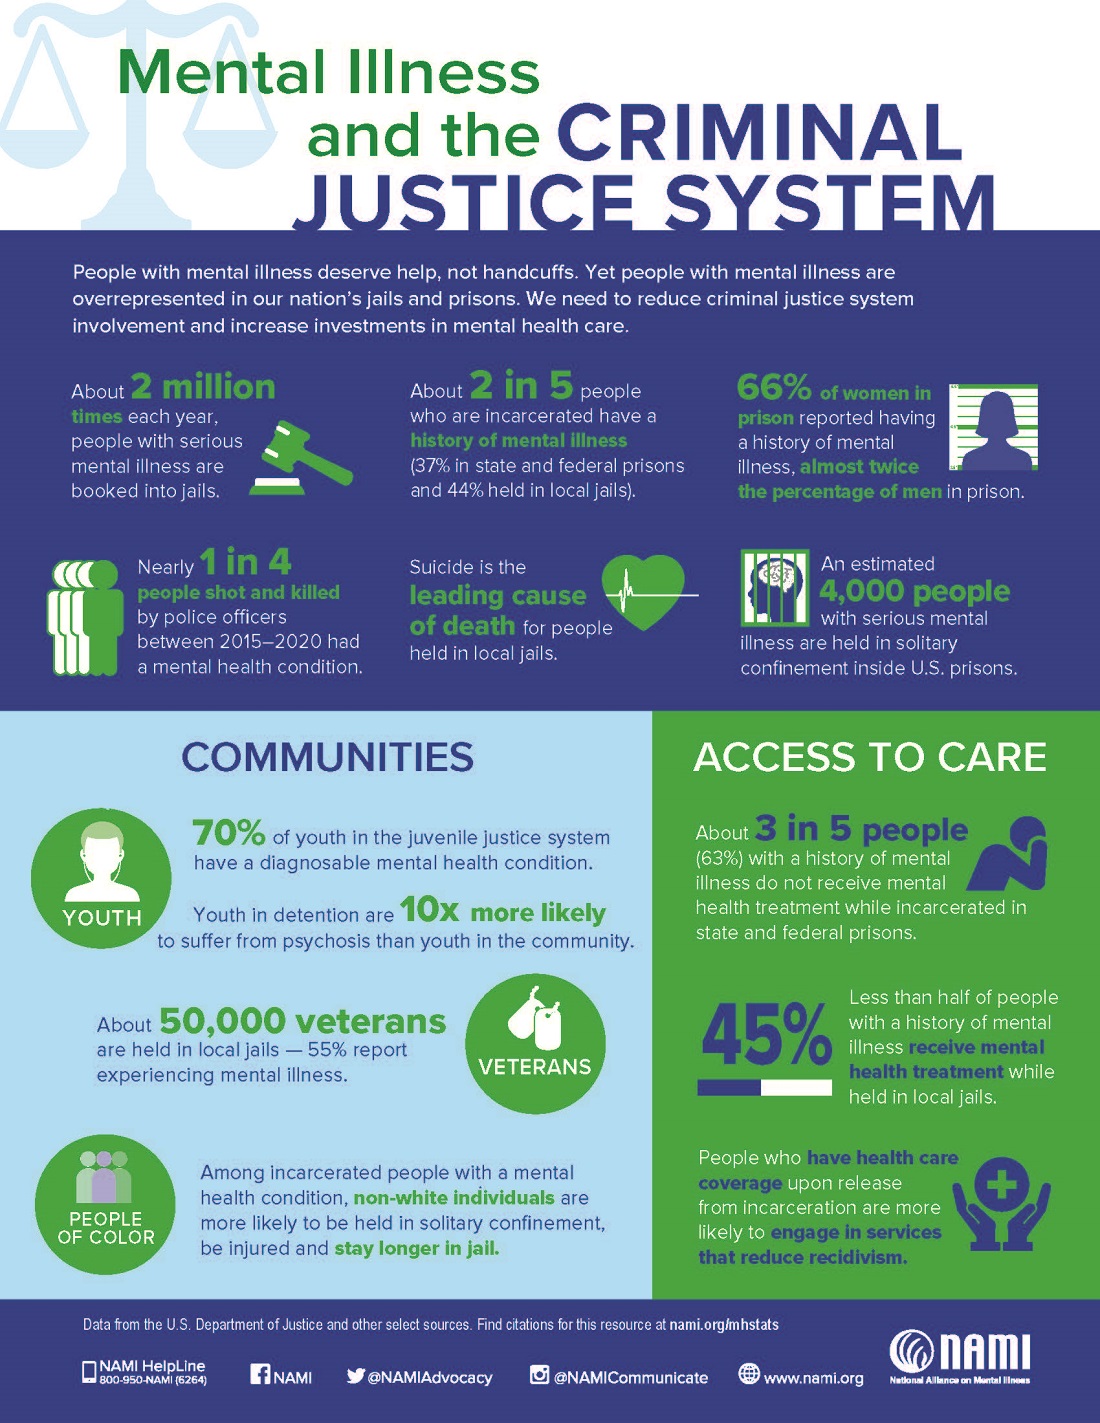 NAMI Flyer - Mental Illness and the Criminal Justice System